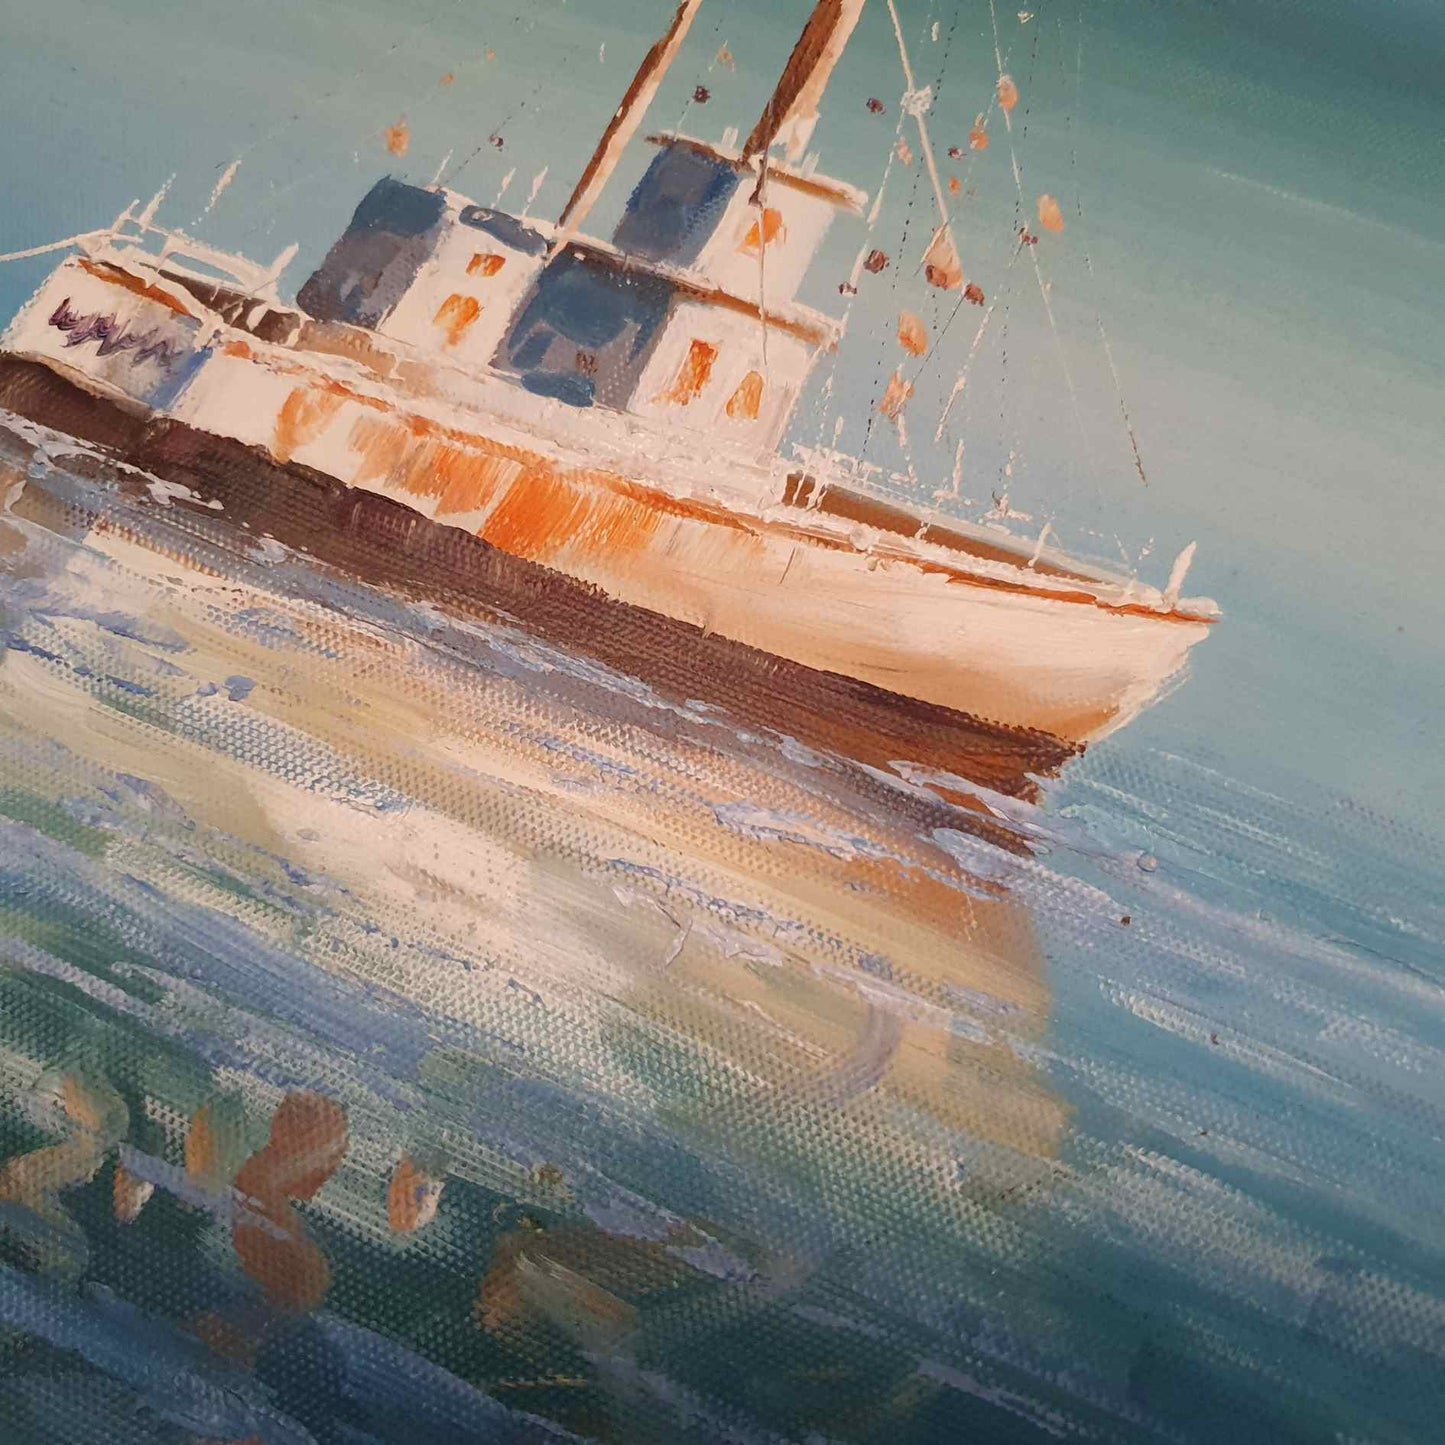 Fishing Boat at Work painting 90x60 cm